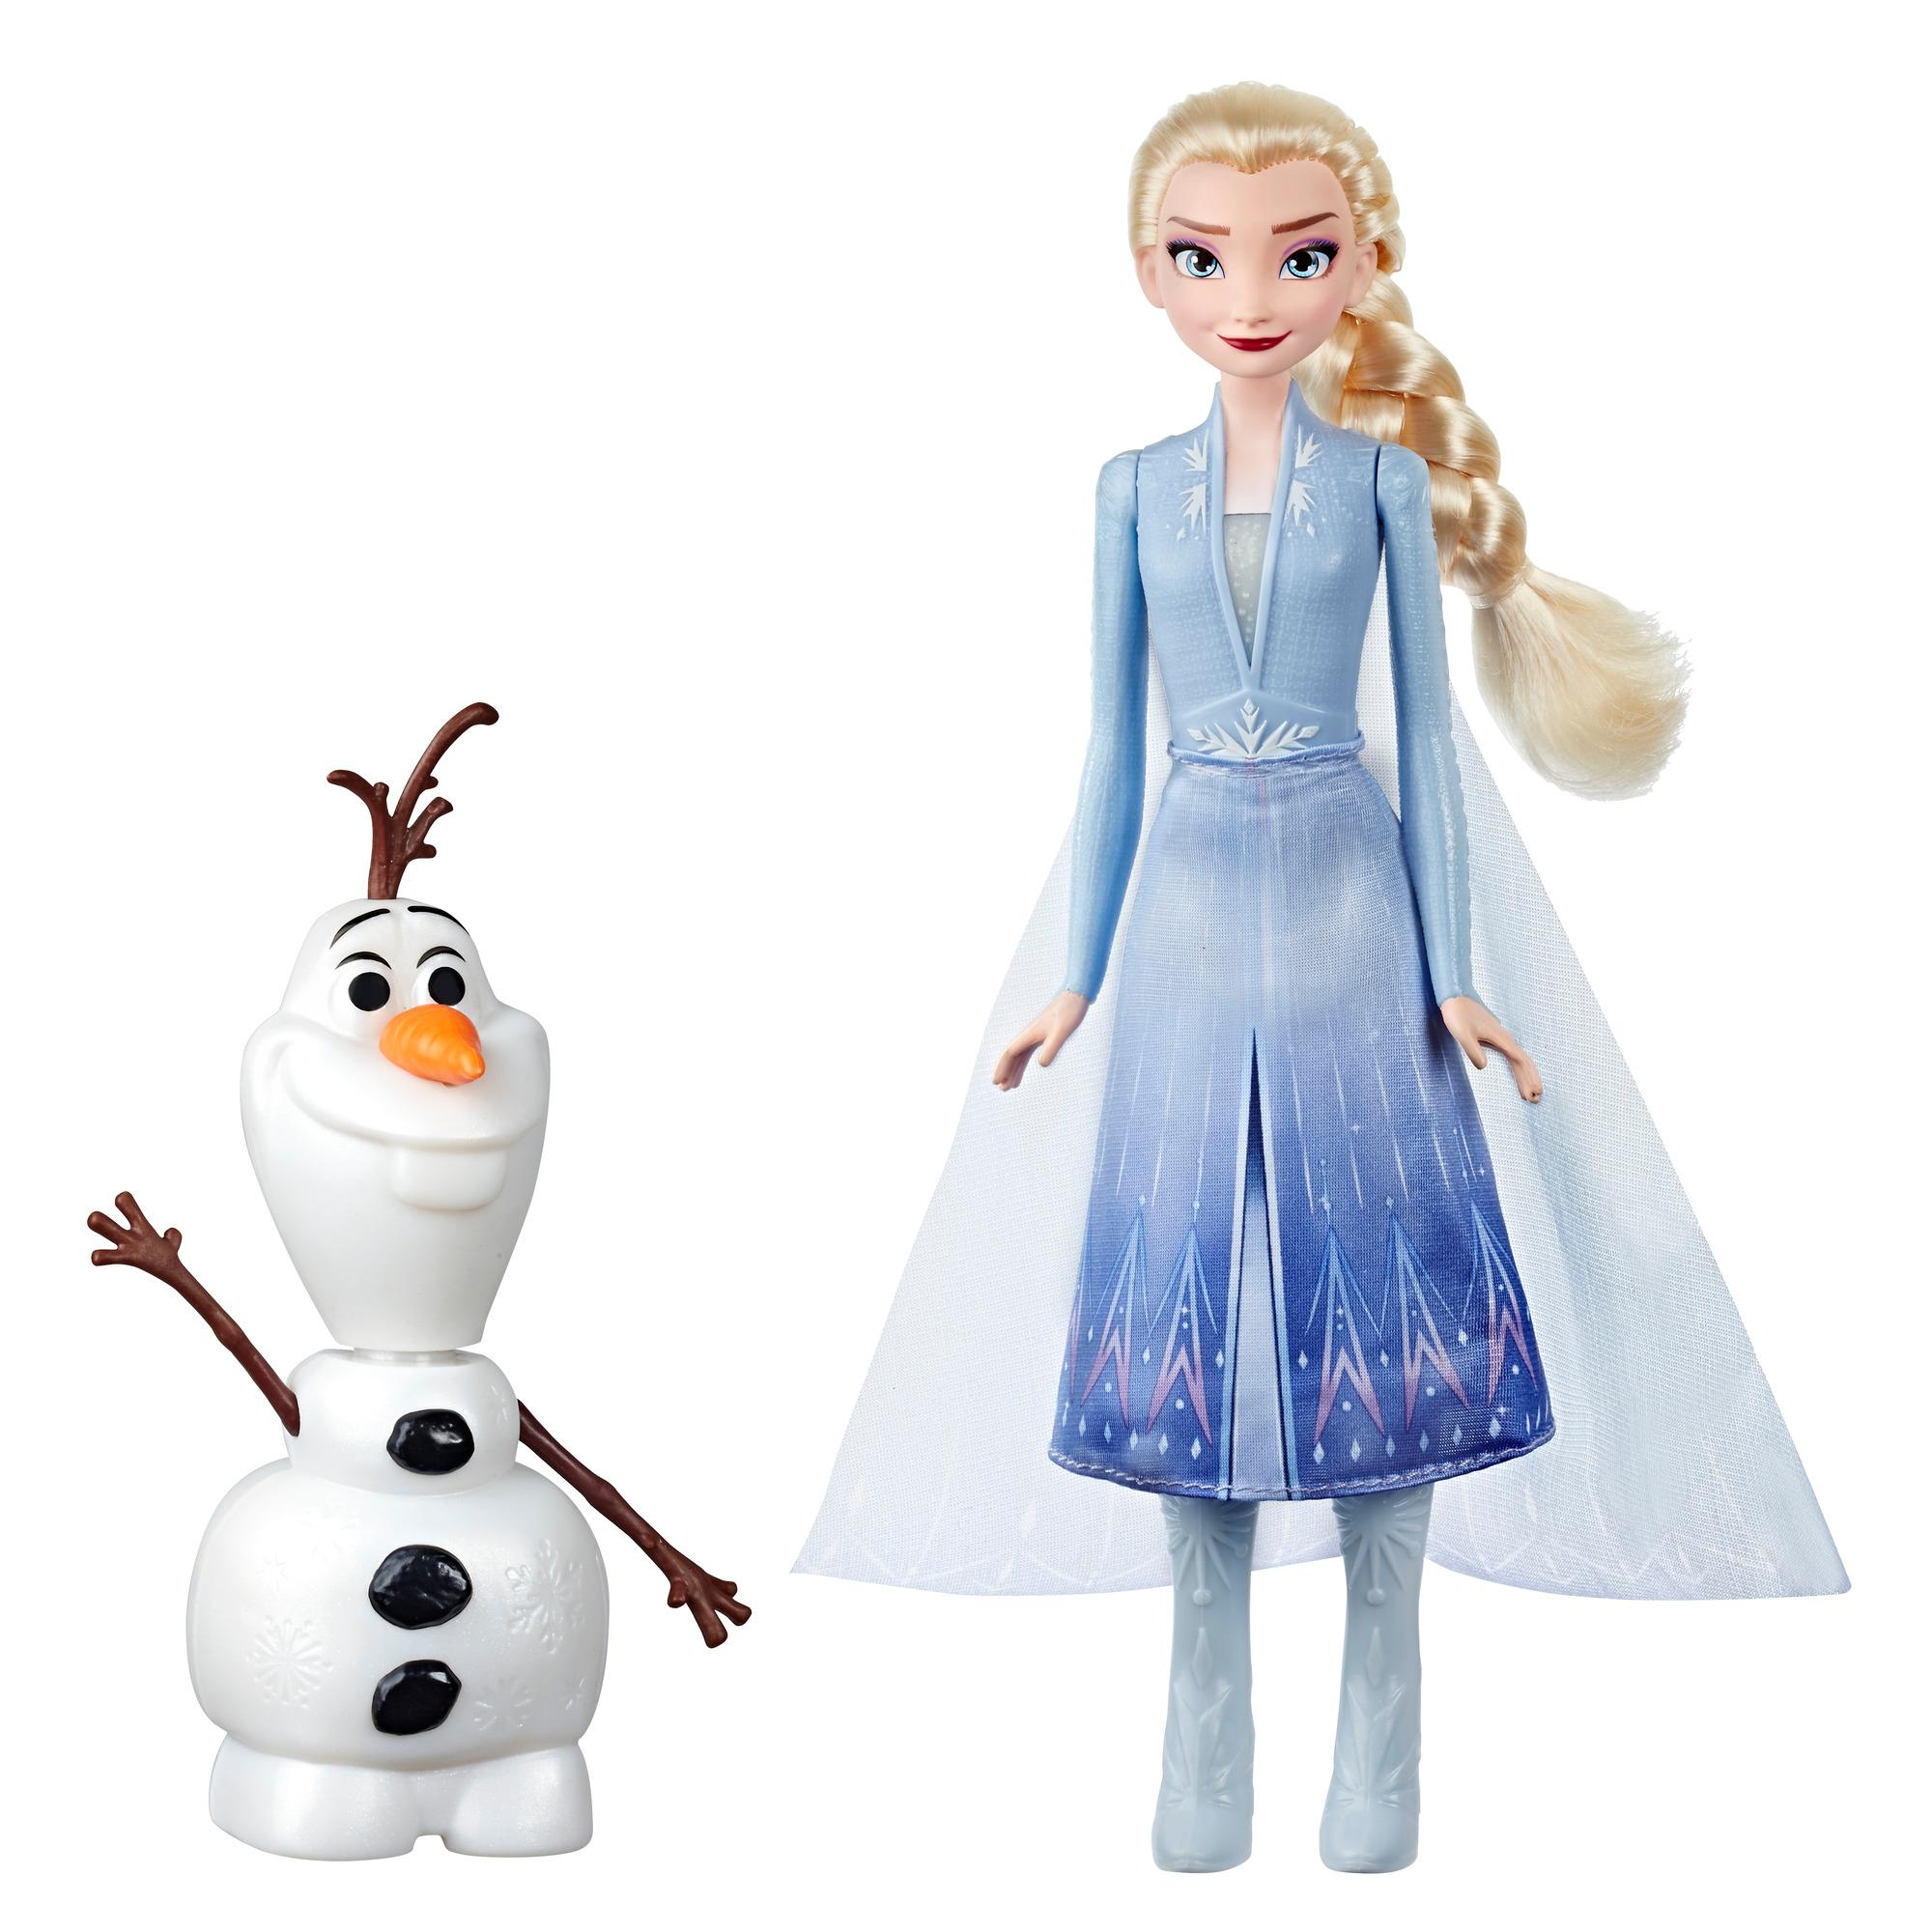 Disney Frozen Talk and Glow Olaf and Elsa Dolls, Remote Control Elsa Activates Talking, Dancing, Glowing Olaf, Inspired by Disney's Frozen 2 Movie - Toy For Kids Ages 3 and Up